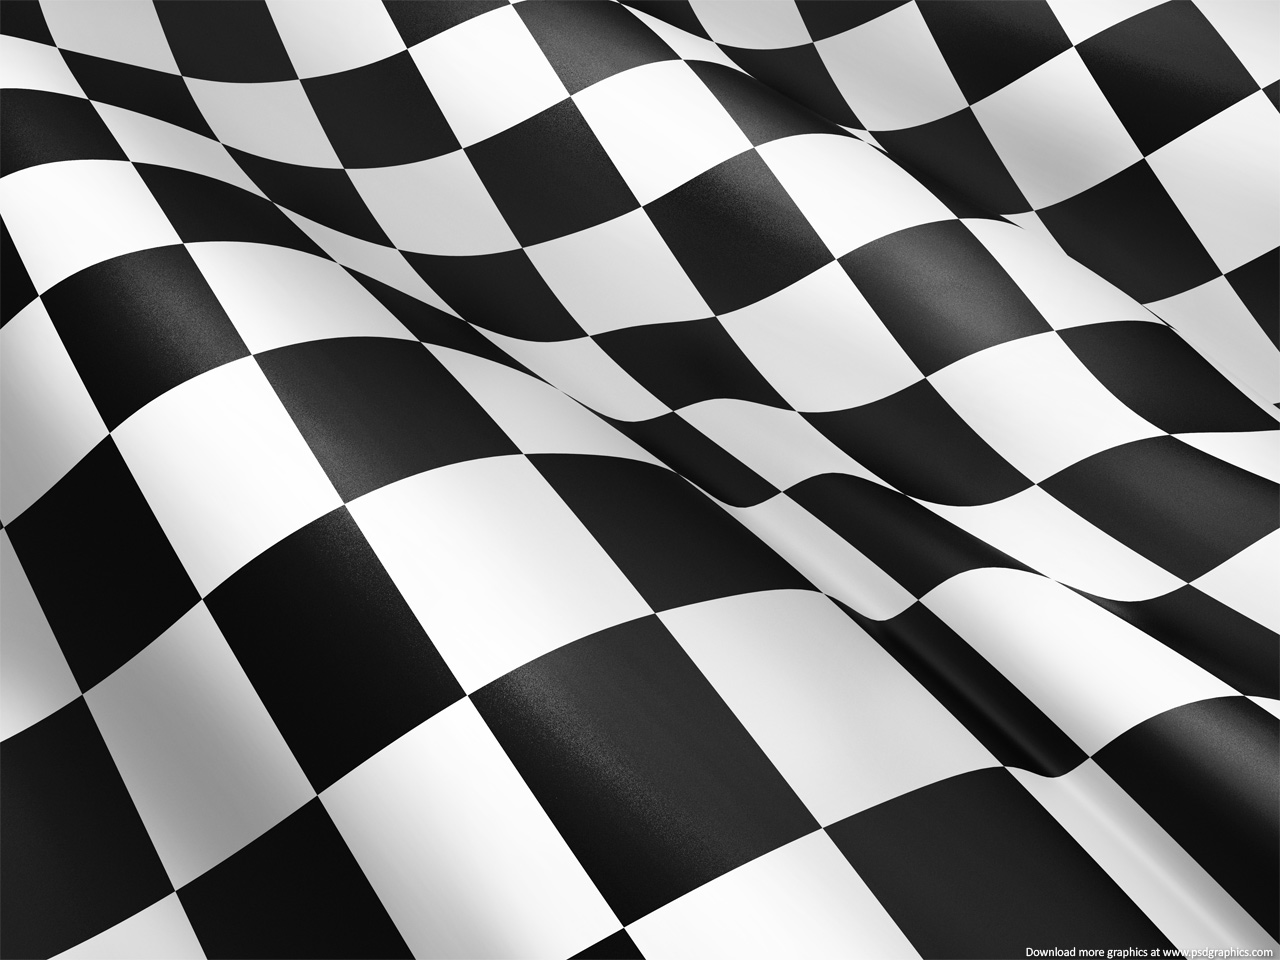 Medium size preview 1280x960px Checkered flag background 1280x960